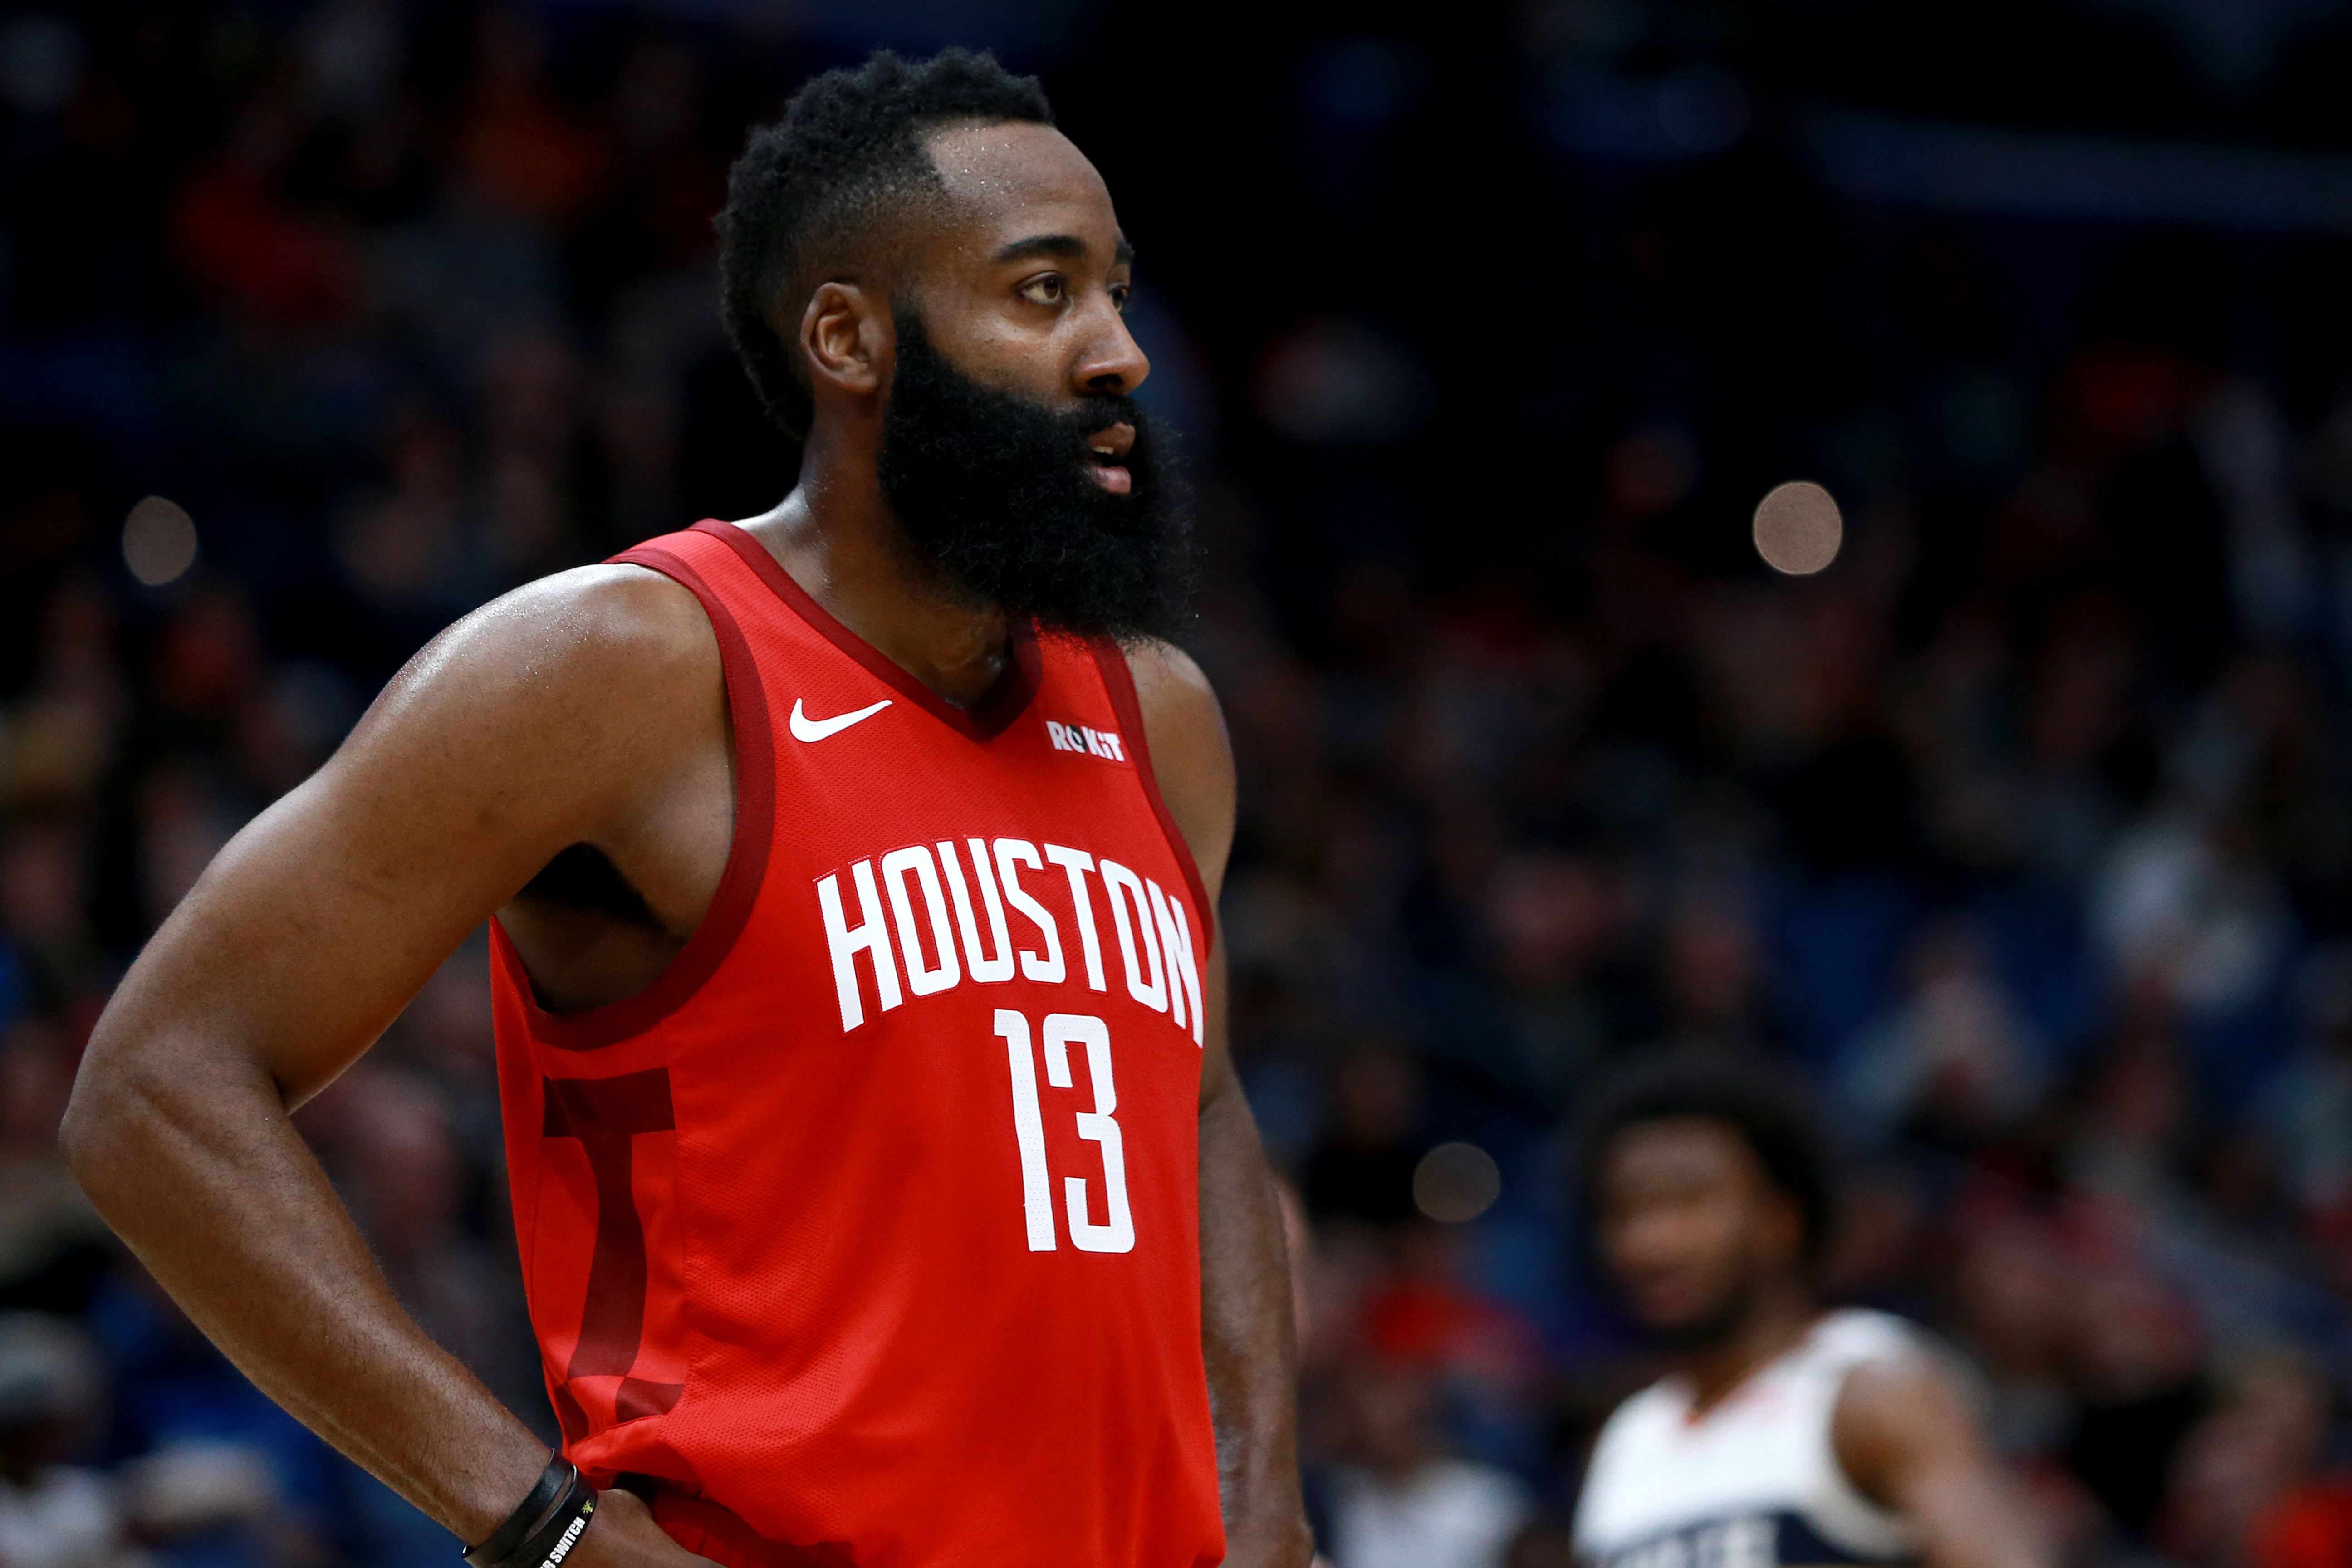 Twitter thought James Harden wore pajamas to tonight's game